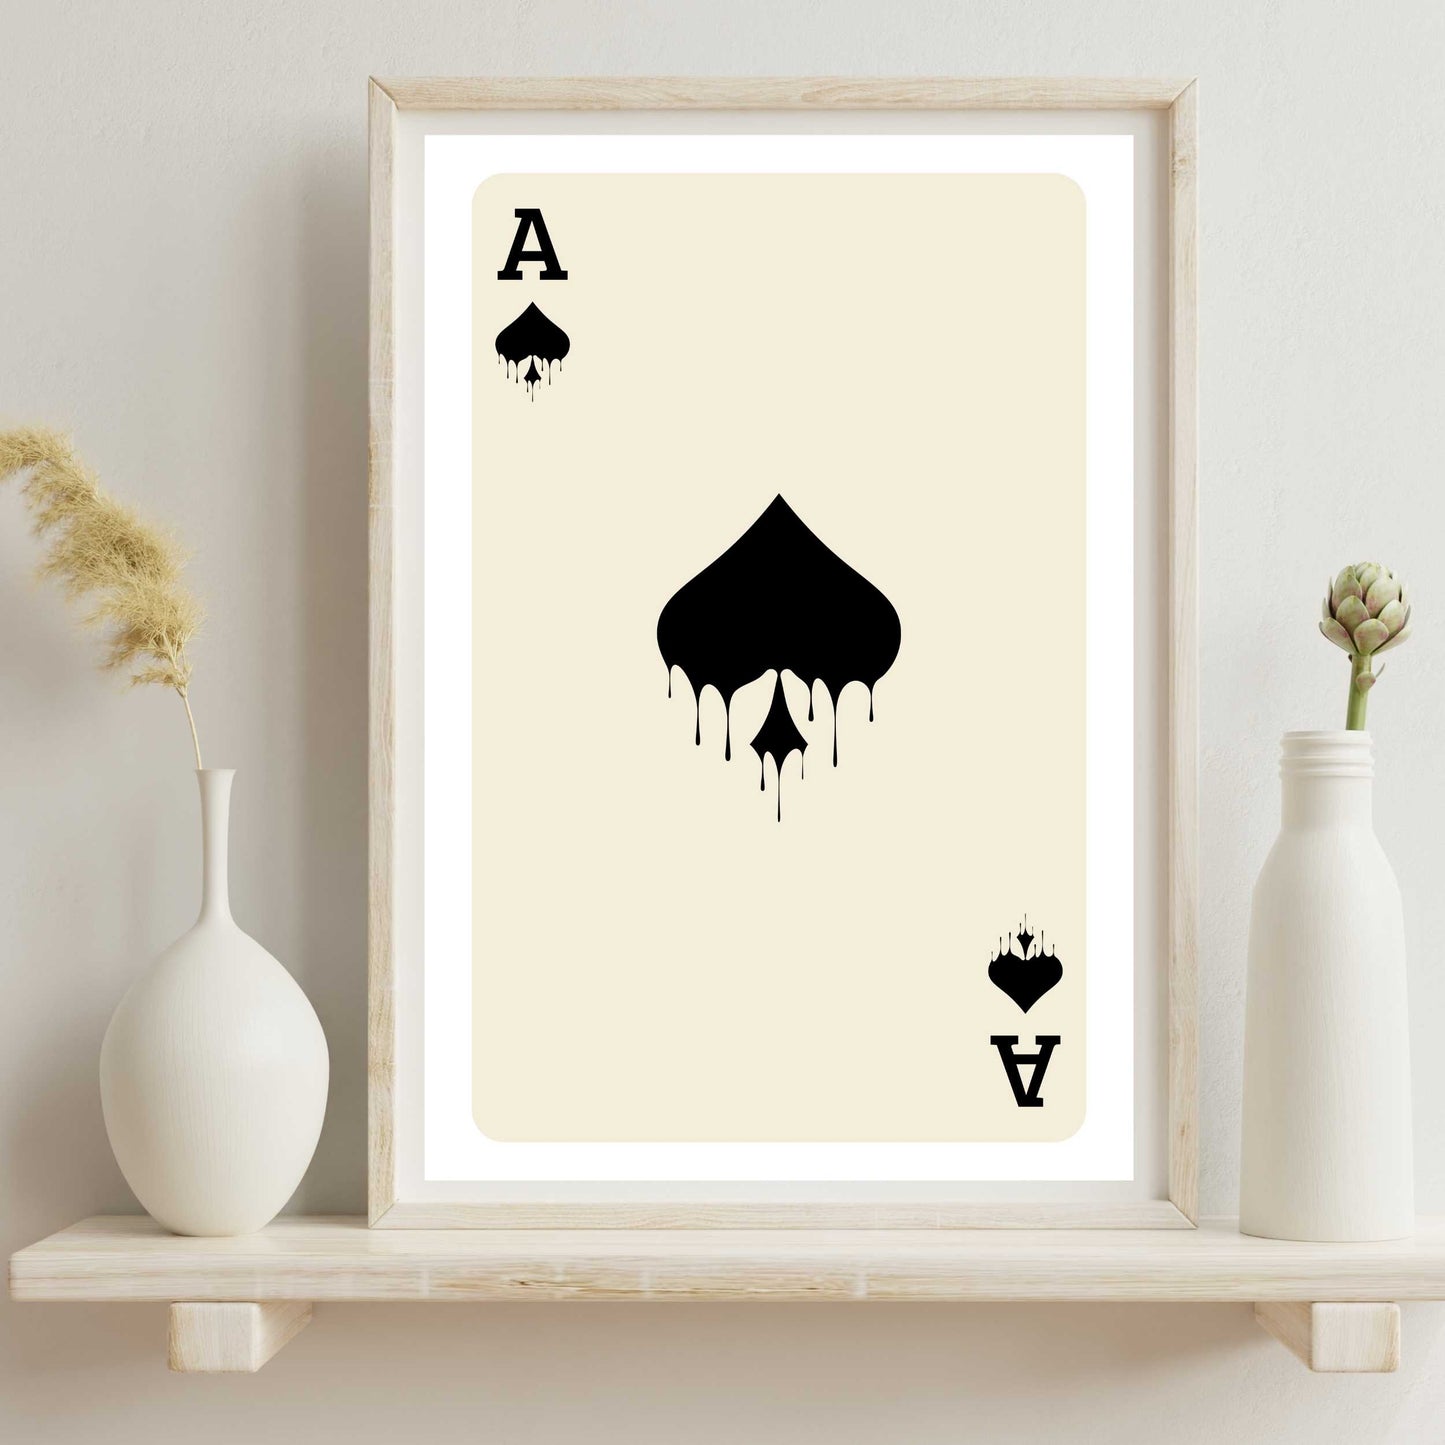 Ace of Spades Poster #04